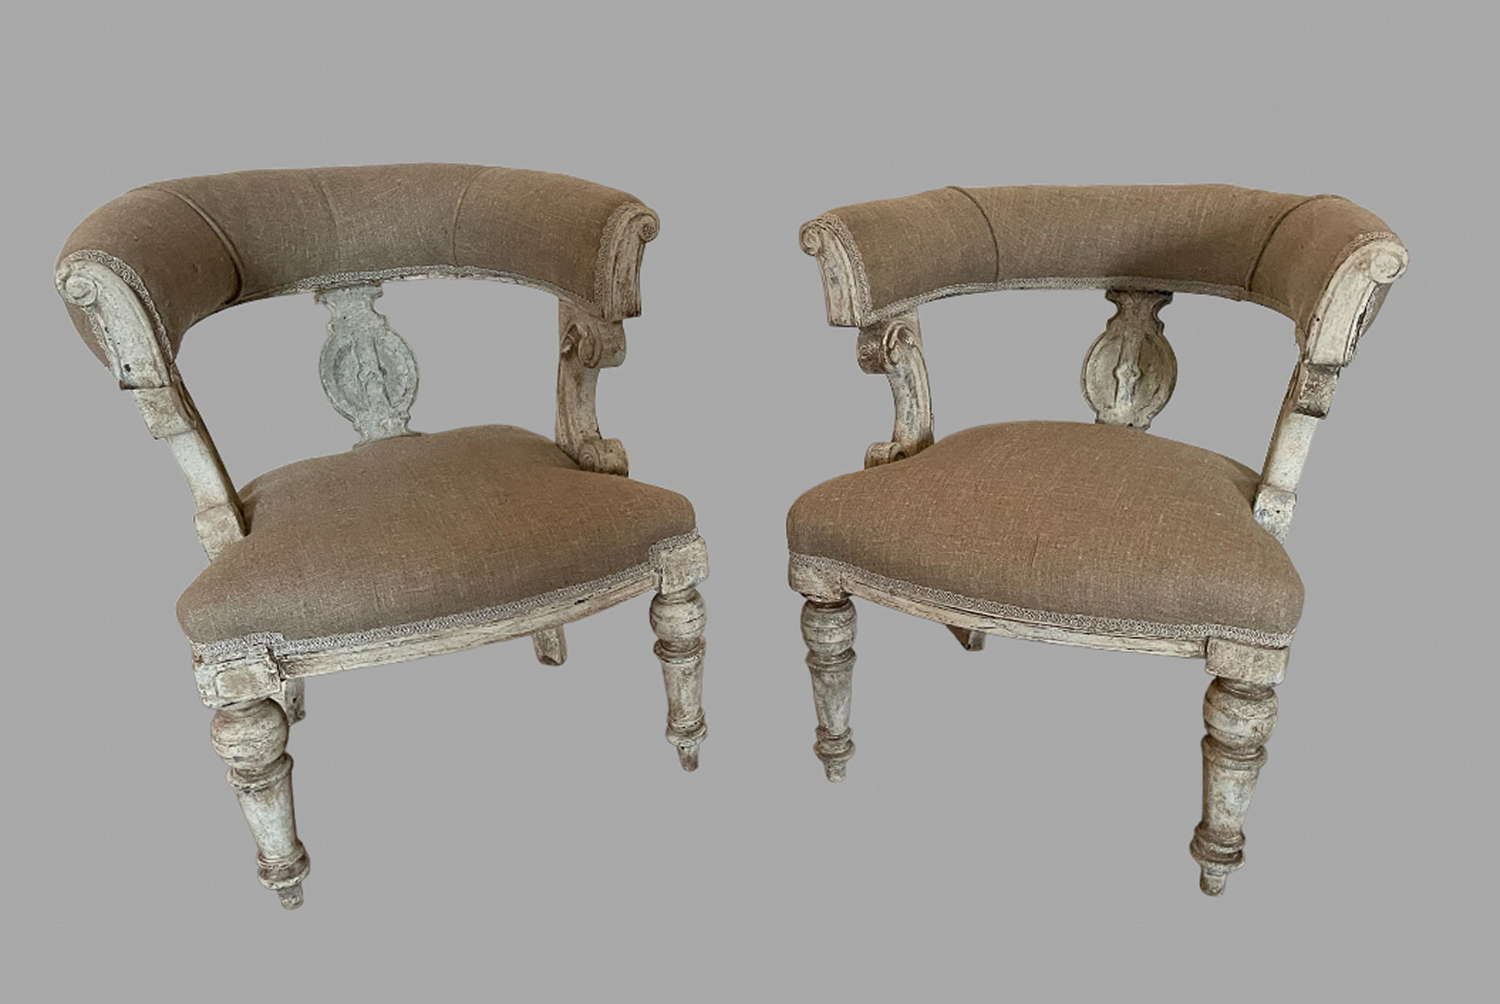 A Pair of 19thc Cock Fighting Chairs